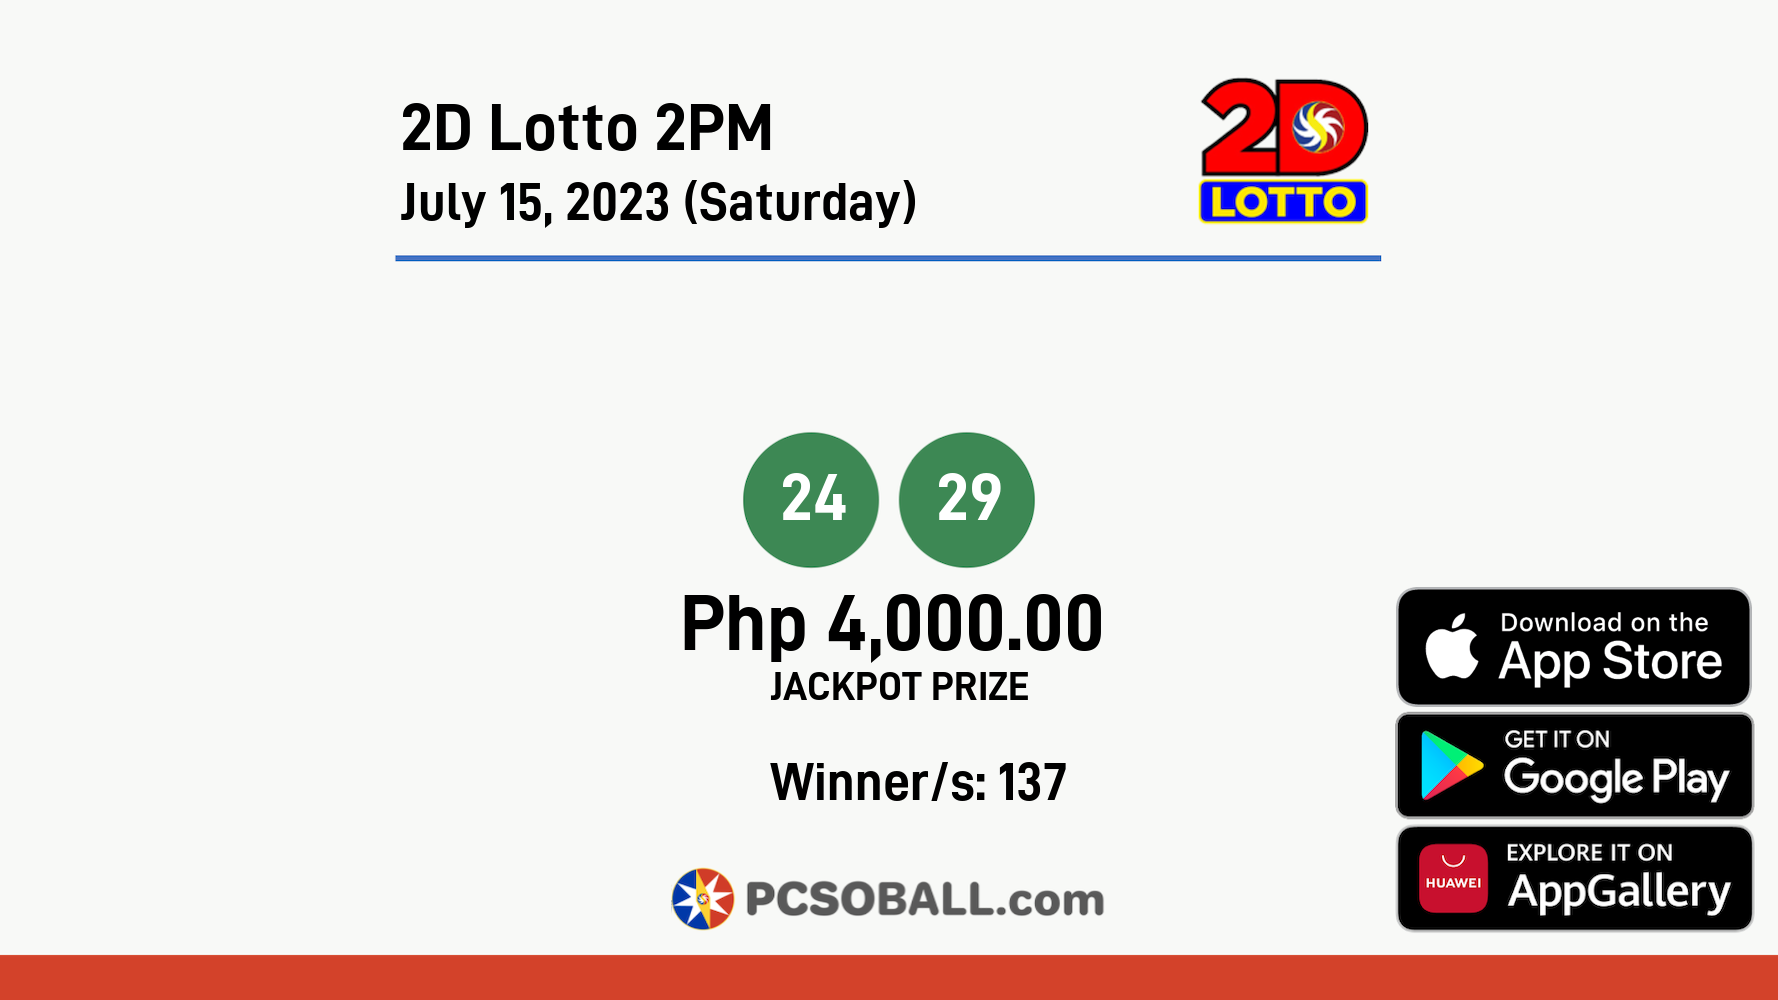 2D Lotto 2PM July 15, 2023 (Saturday) Result